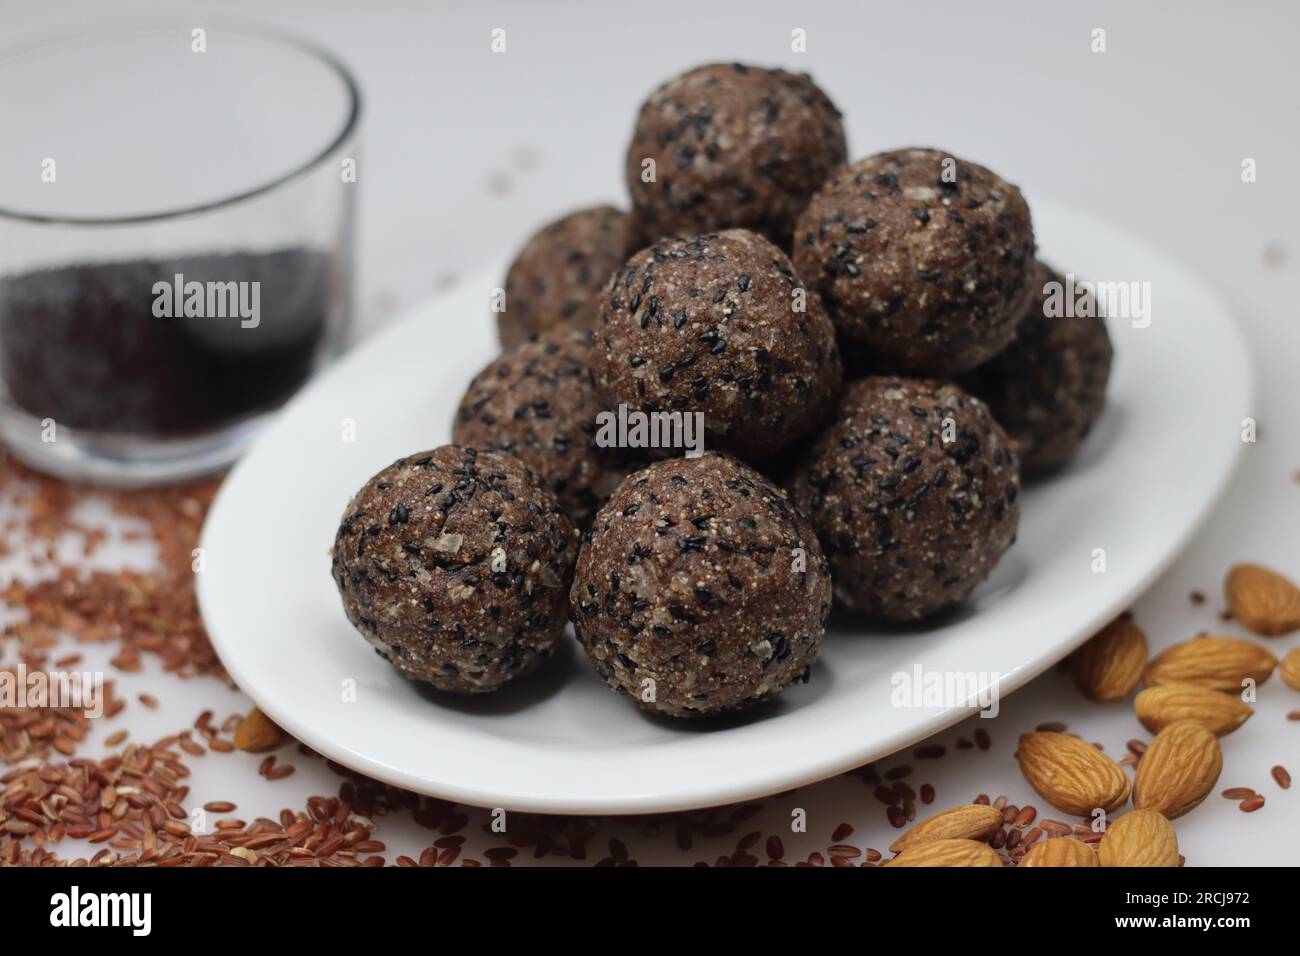 Navara til laddu. Sweet ball made of roasted and ground navara rice, roasted sesame seeds, jaggery and grated coconut flavored with cardamom. Healthy Stock Photo